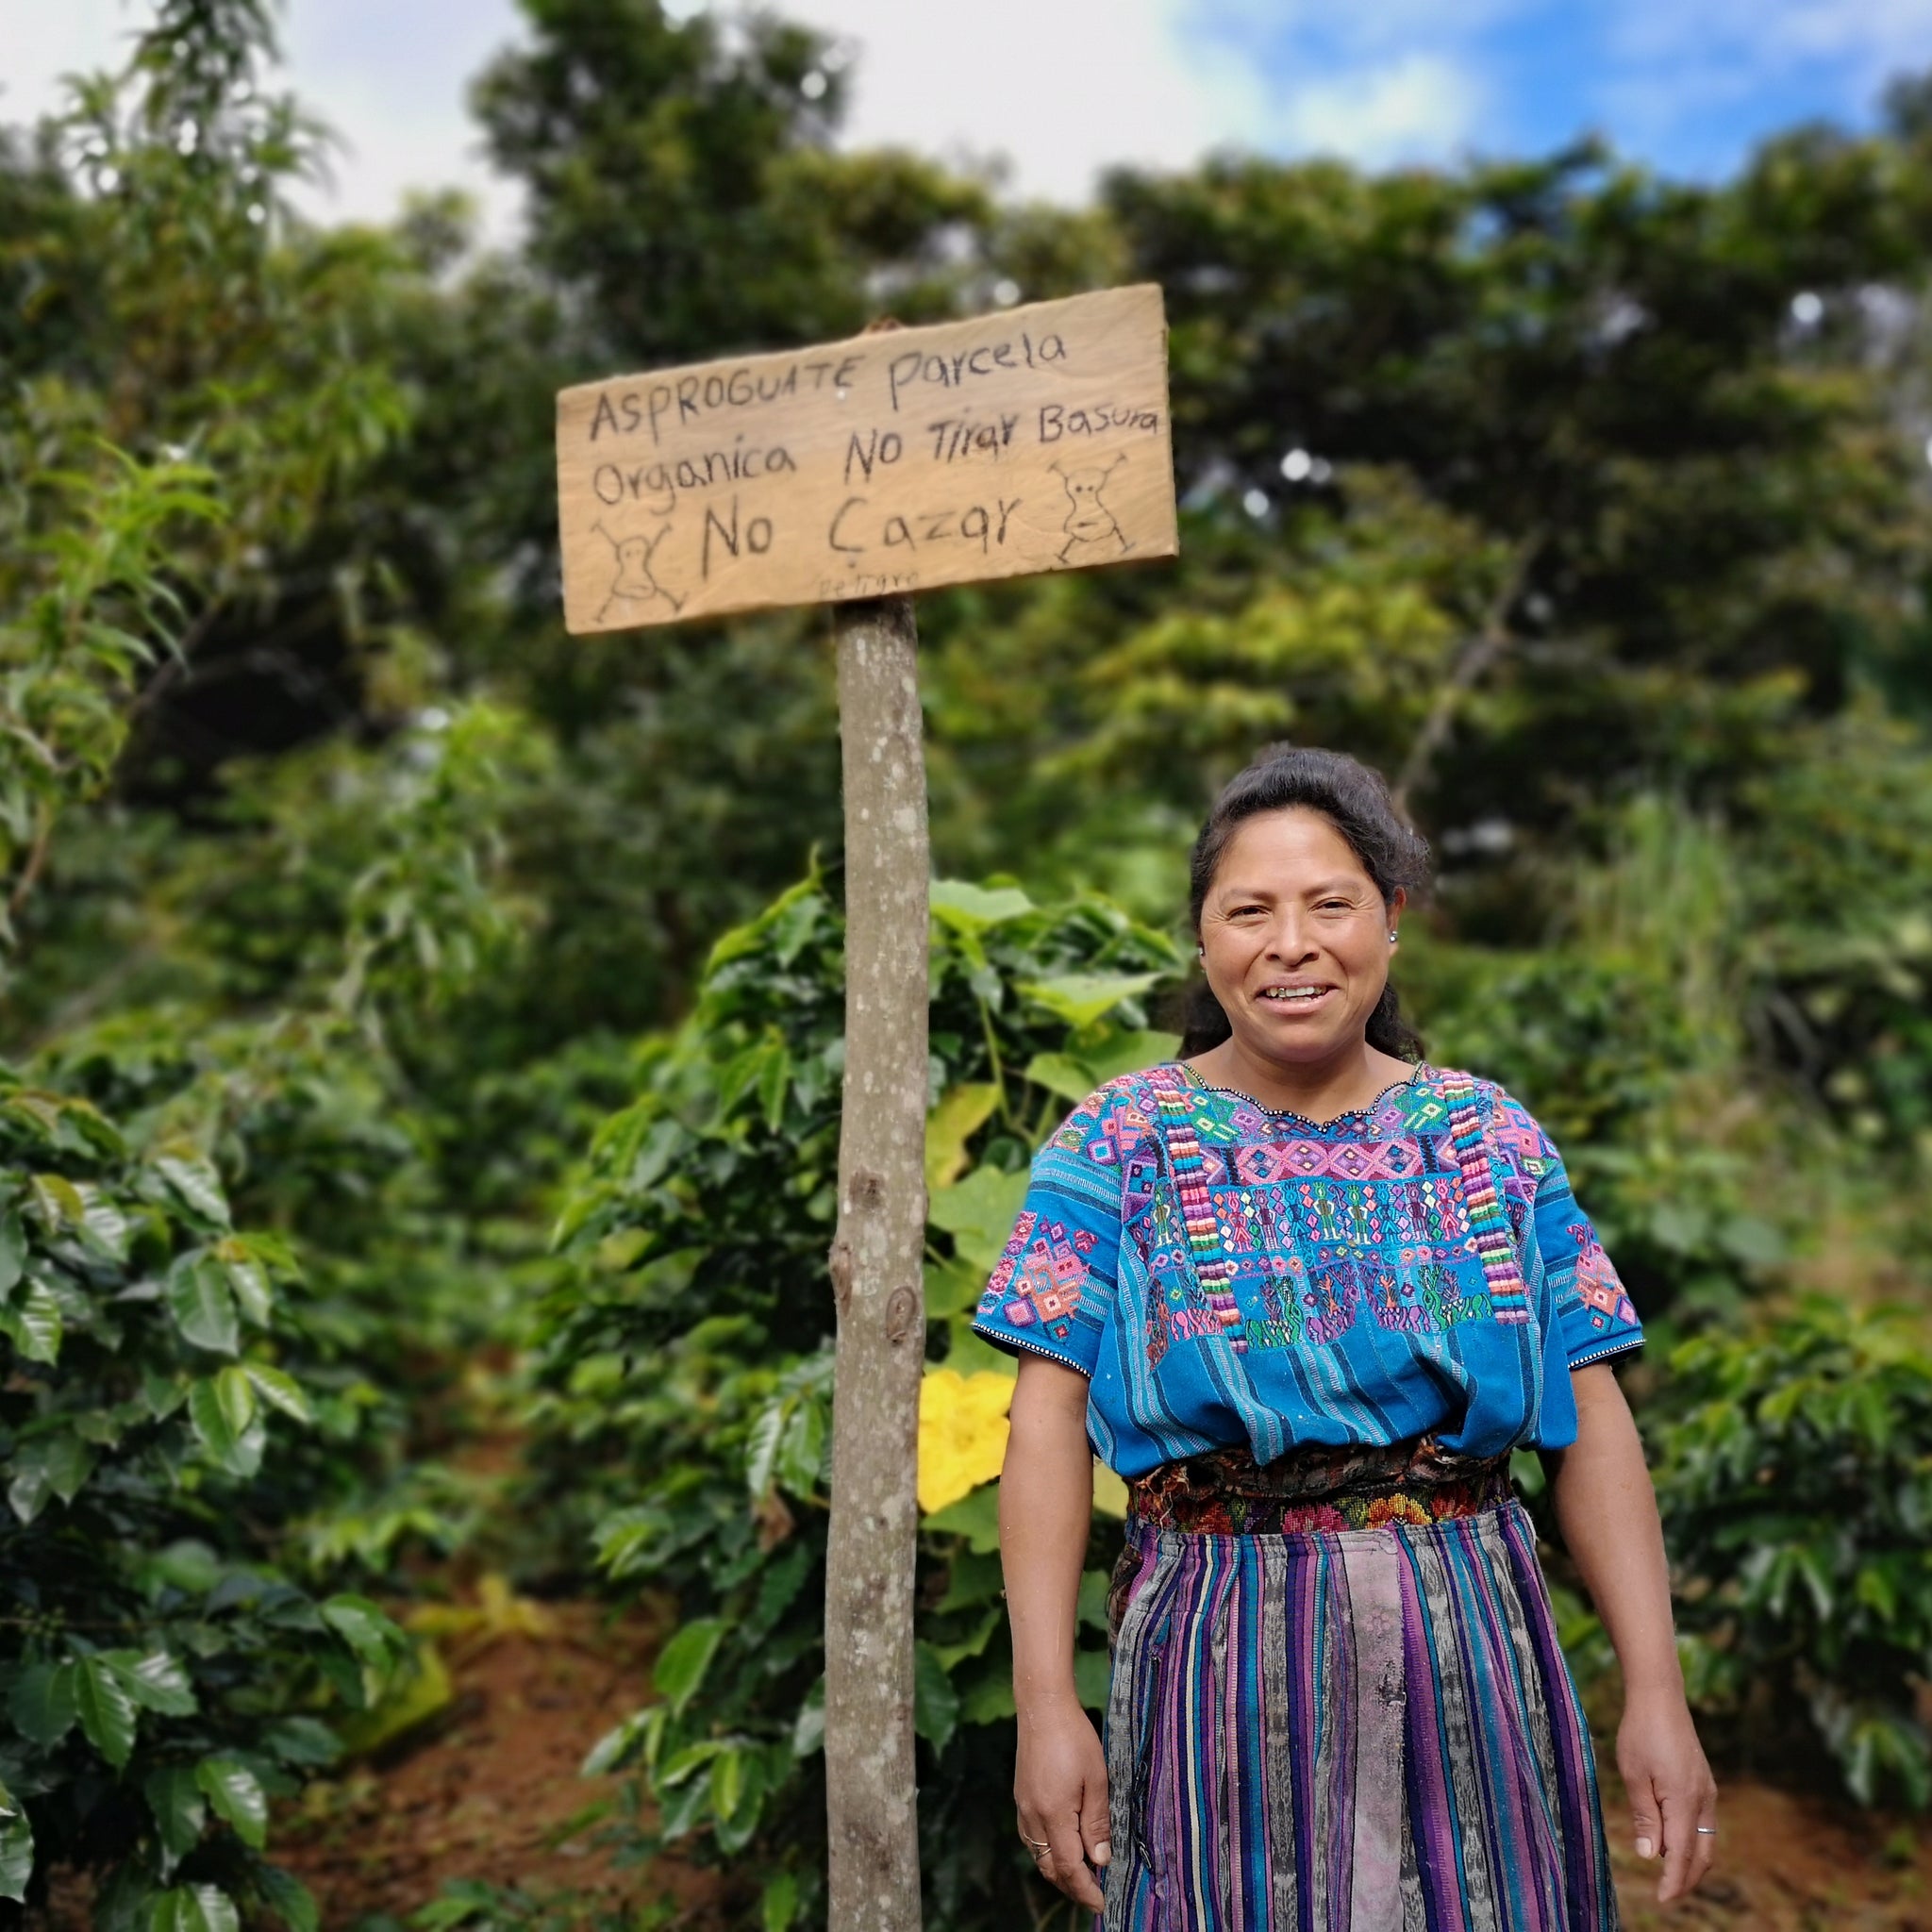 All our coffees are grown using organic regenerative agricultural practices